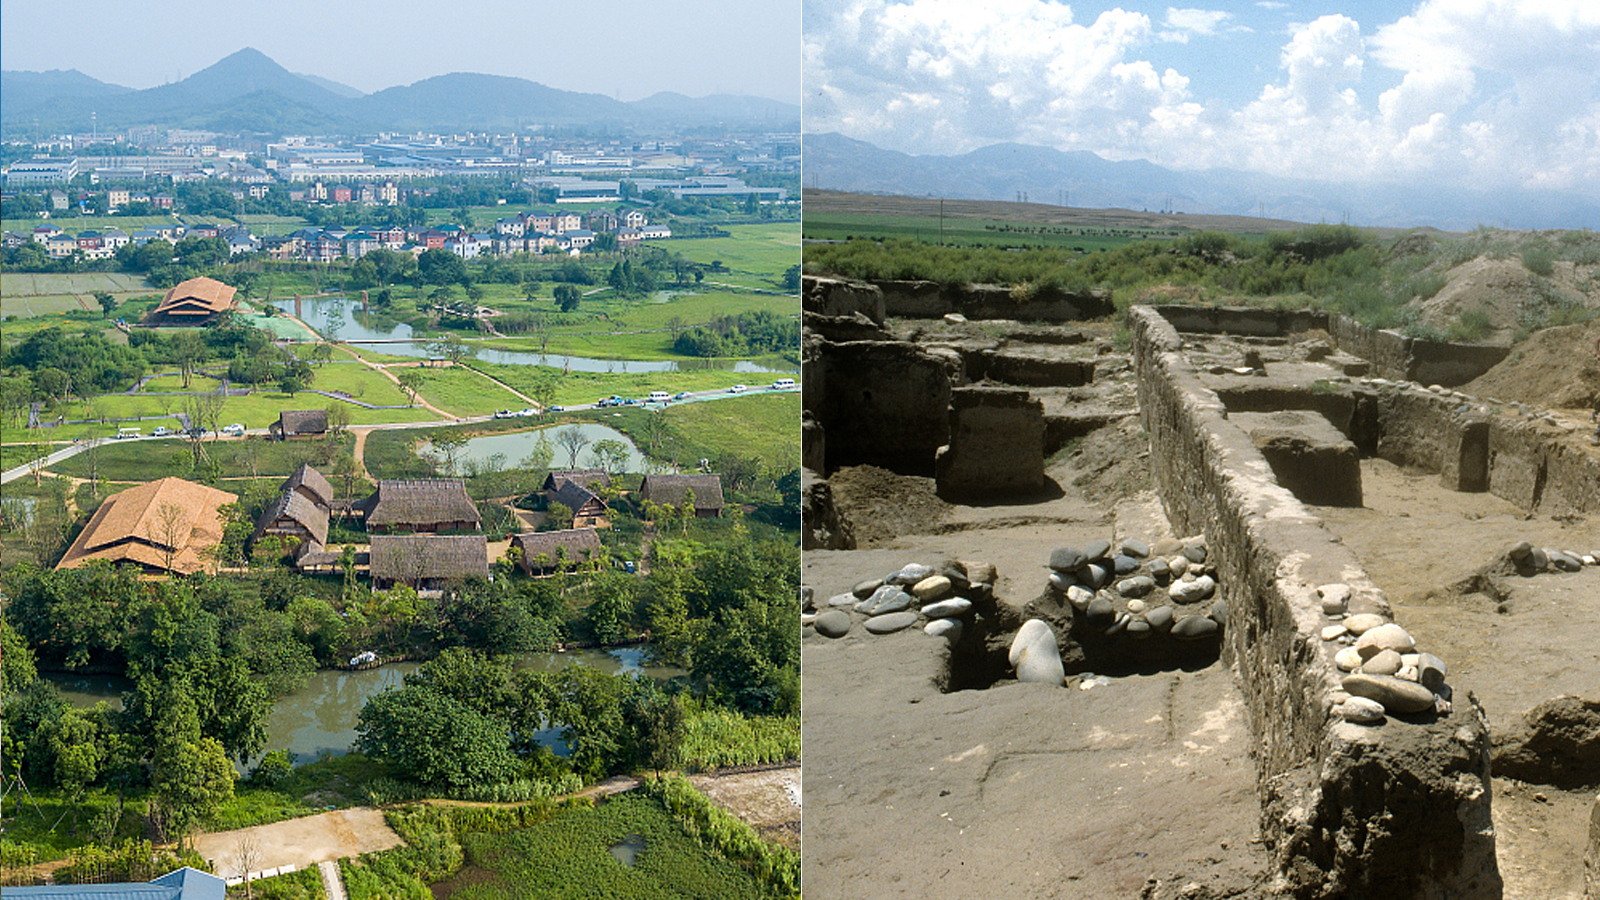 The Archaeological Ruins of Liangzhu City in China (left) and the Proto-urban Site of Sarazm in Tajikistan. /CFP